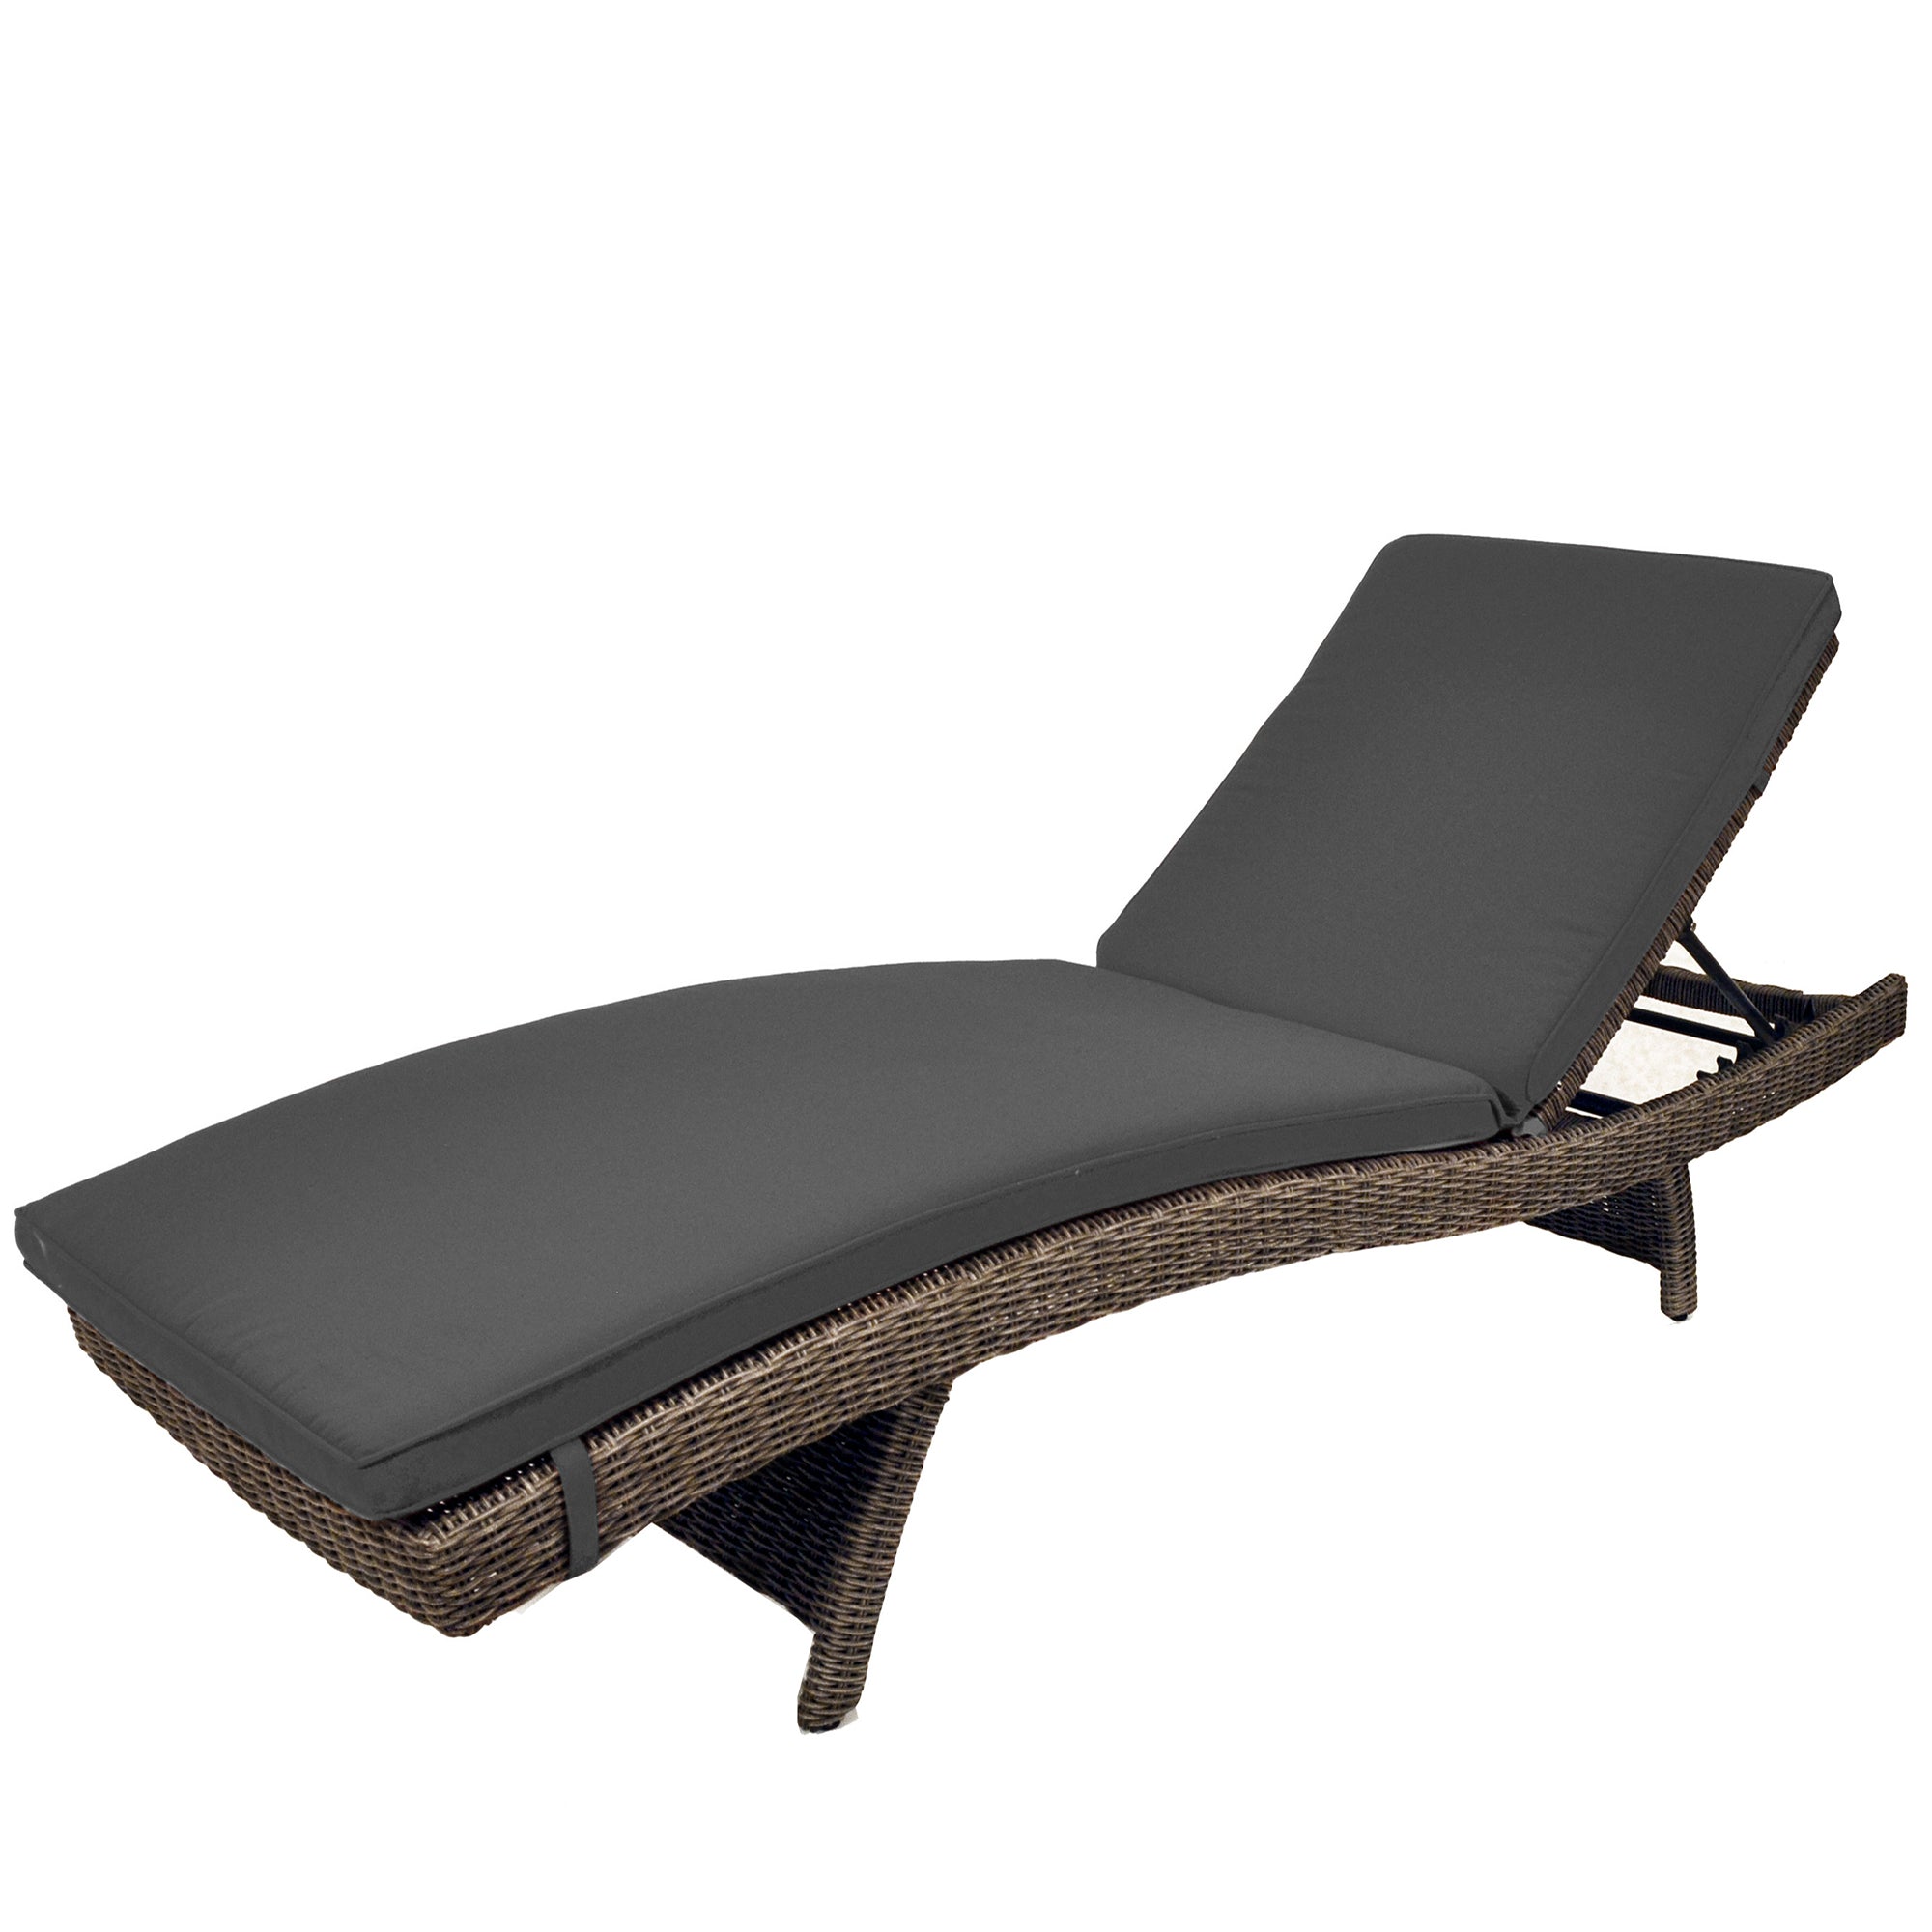 Beautifully crafted, the KETTLER Palma Lounger is made with a sturdy aluminum frame, which is intricately covered with hand-woven synthetic wicker. The wicker is waterproof and UV resistant, so you can keep the lounger outdoor all year round. The Palma Collection boasts a wide choice of stylish garden furniture including dining sets, modular lounge sets and sun loungers, so you can dine and lounge outdoors in comfort. Aluminum powder coated frame with full circumference welds